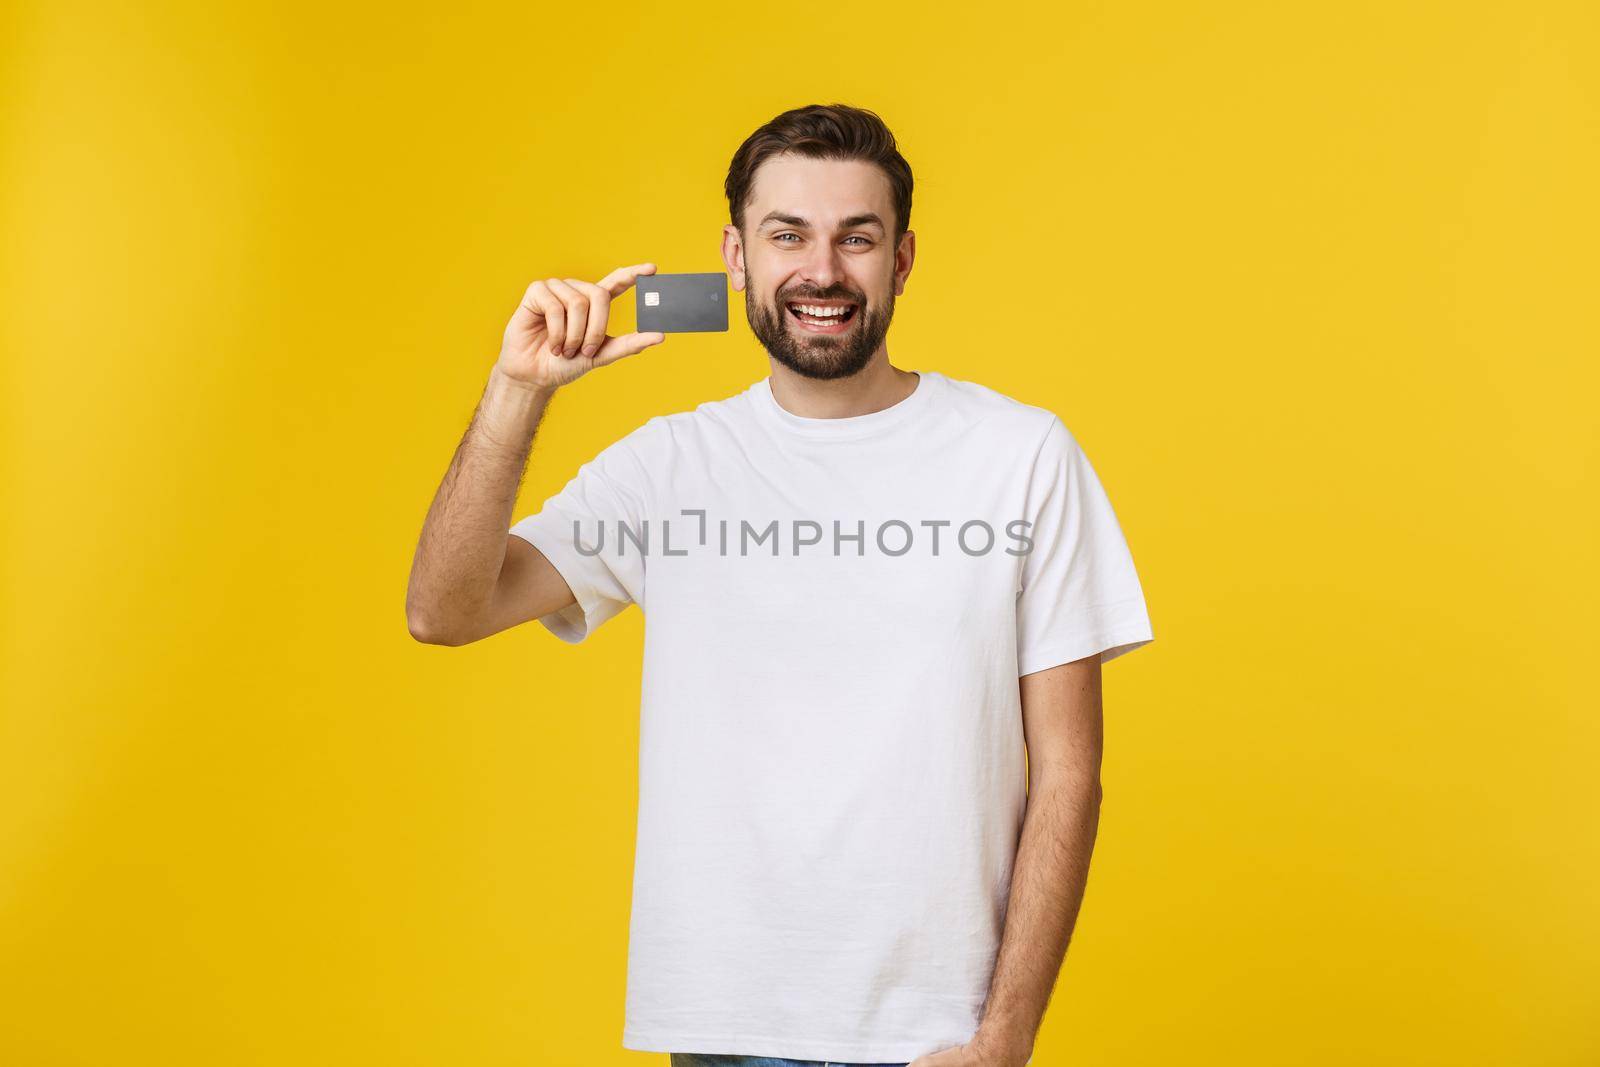 Happy smiling young man showing credit card isolated on yellow background.